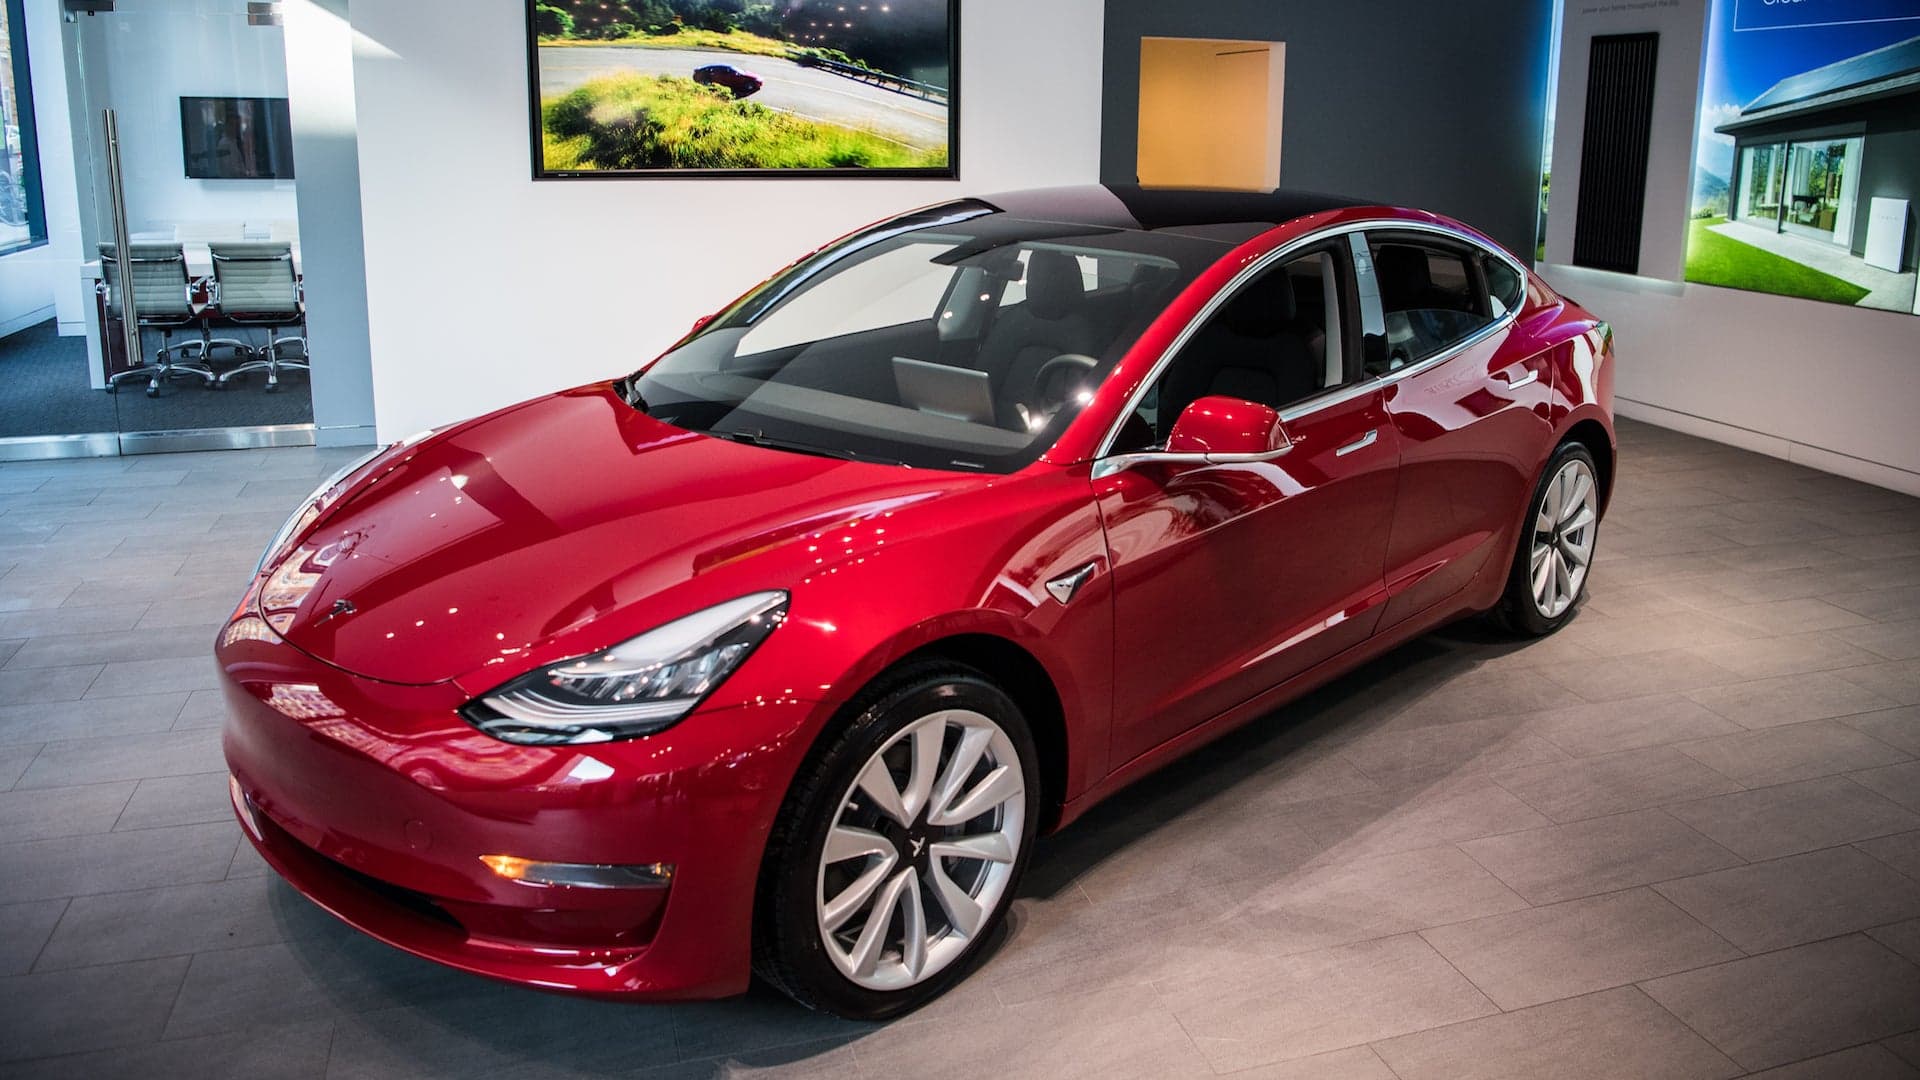 Tesla Increases Price of Mid-Range Model 3 Just Days After Launch